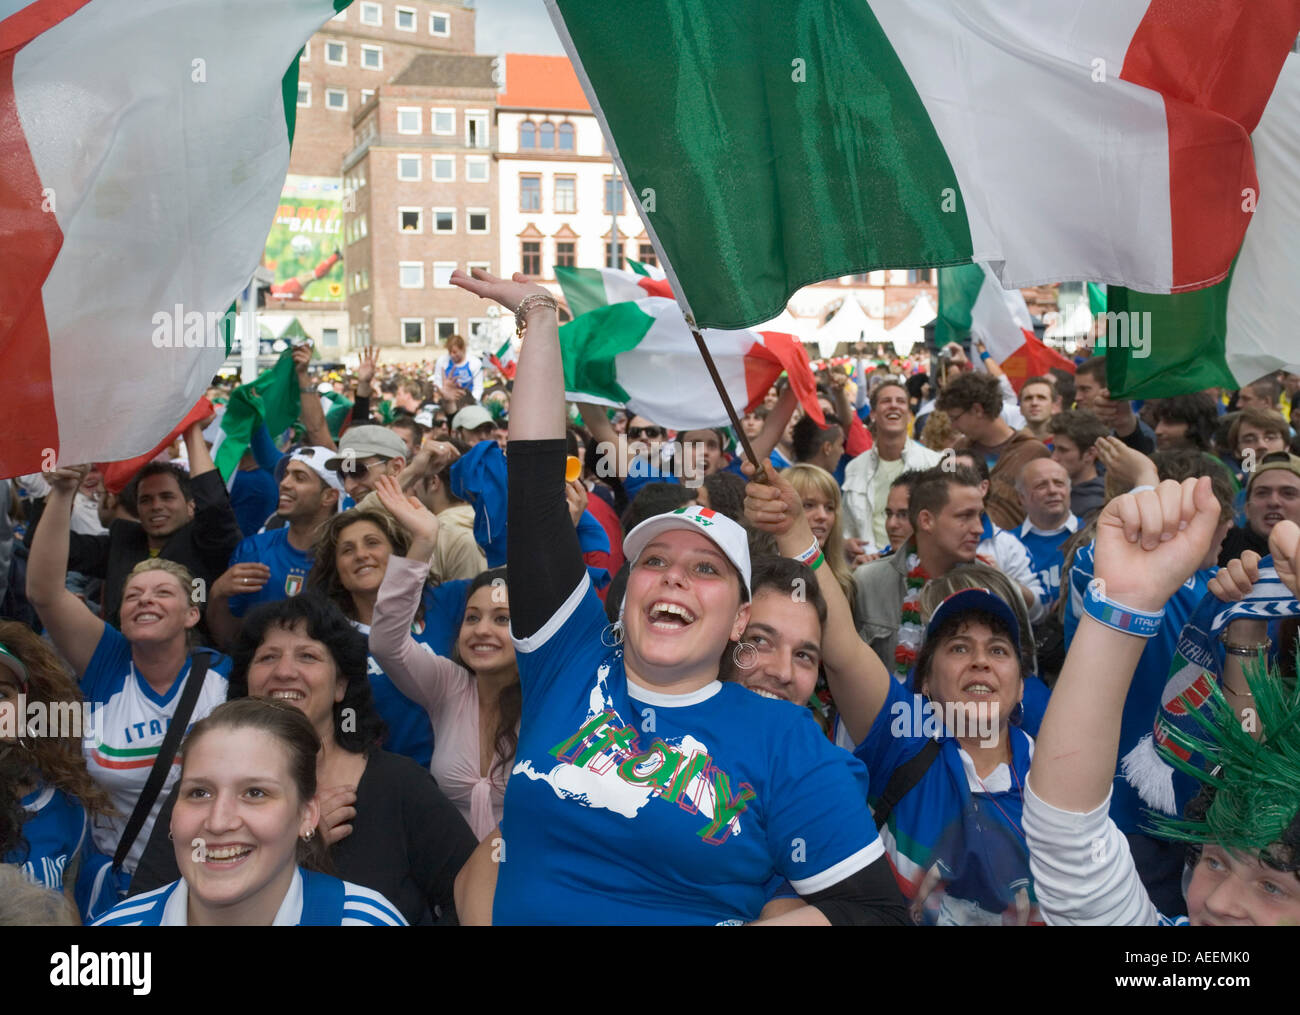 Italian football fans celebrating the victory of their team in the world cup match Italy vs Czech Republic (2:0) Stock Photo